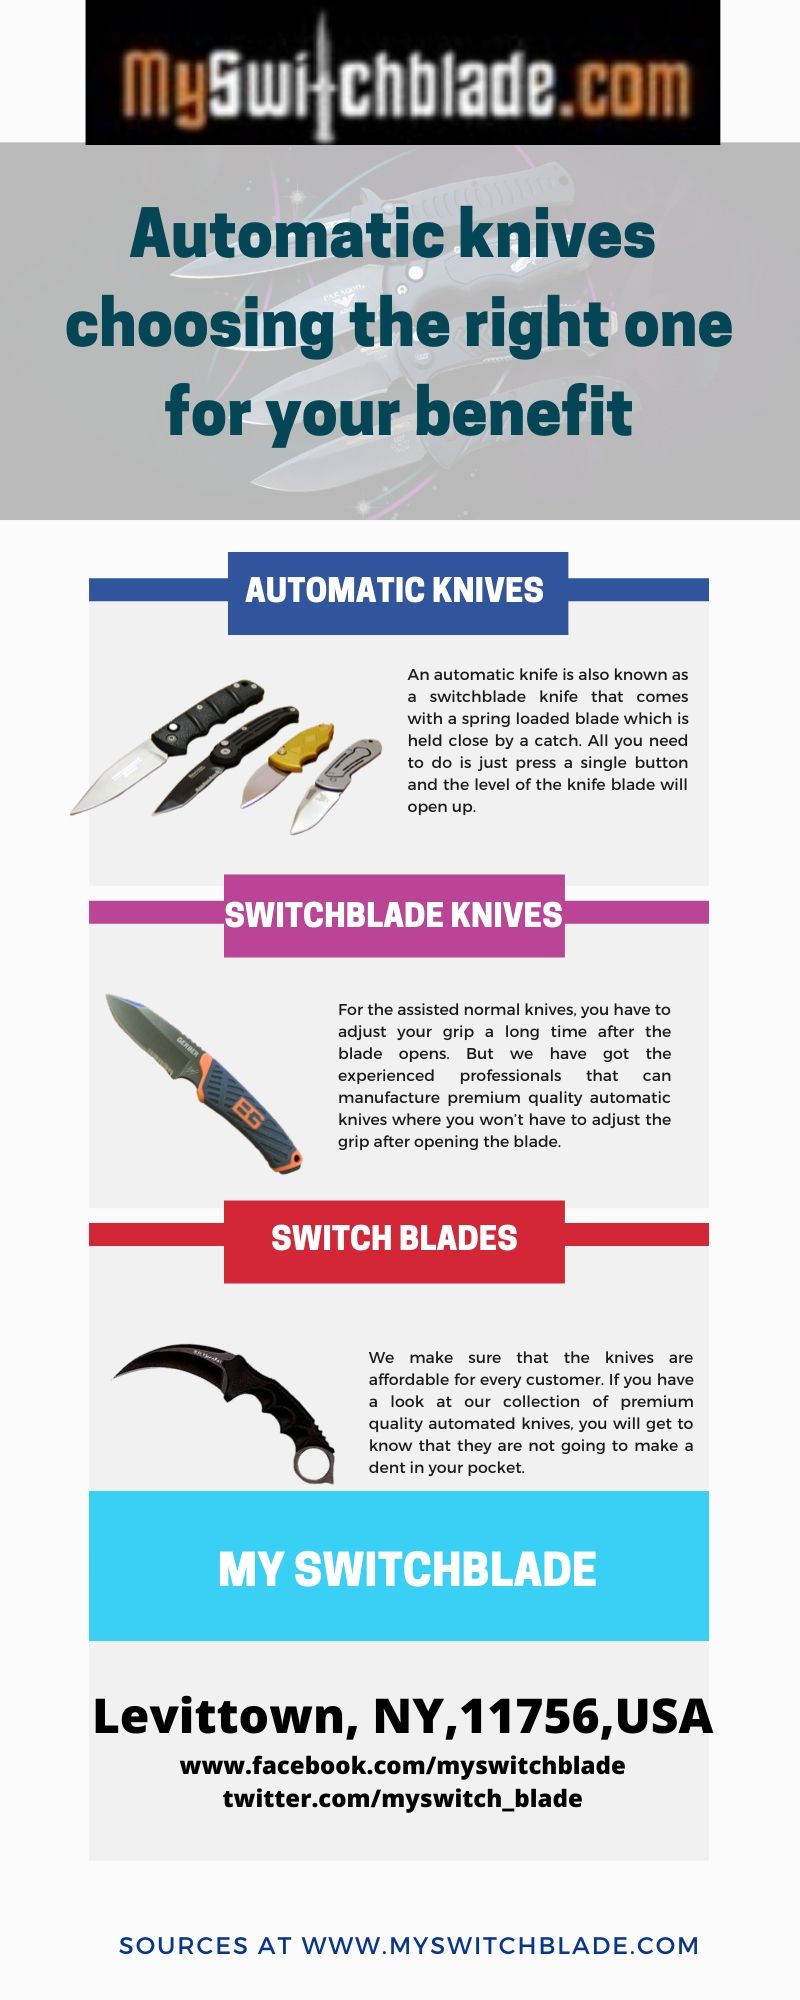 Automatic knives  choosing the right one for your benefit.jpg  by Myswitchblade